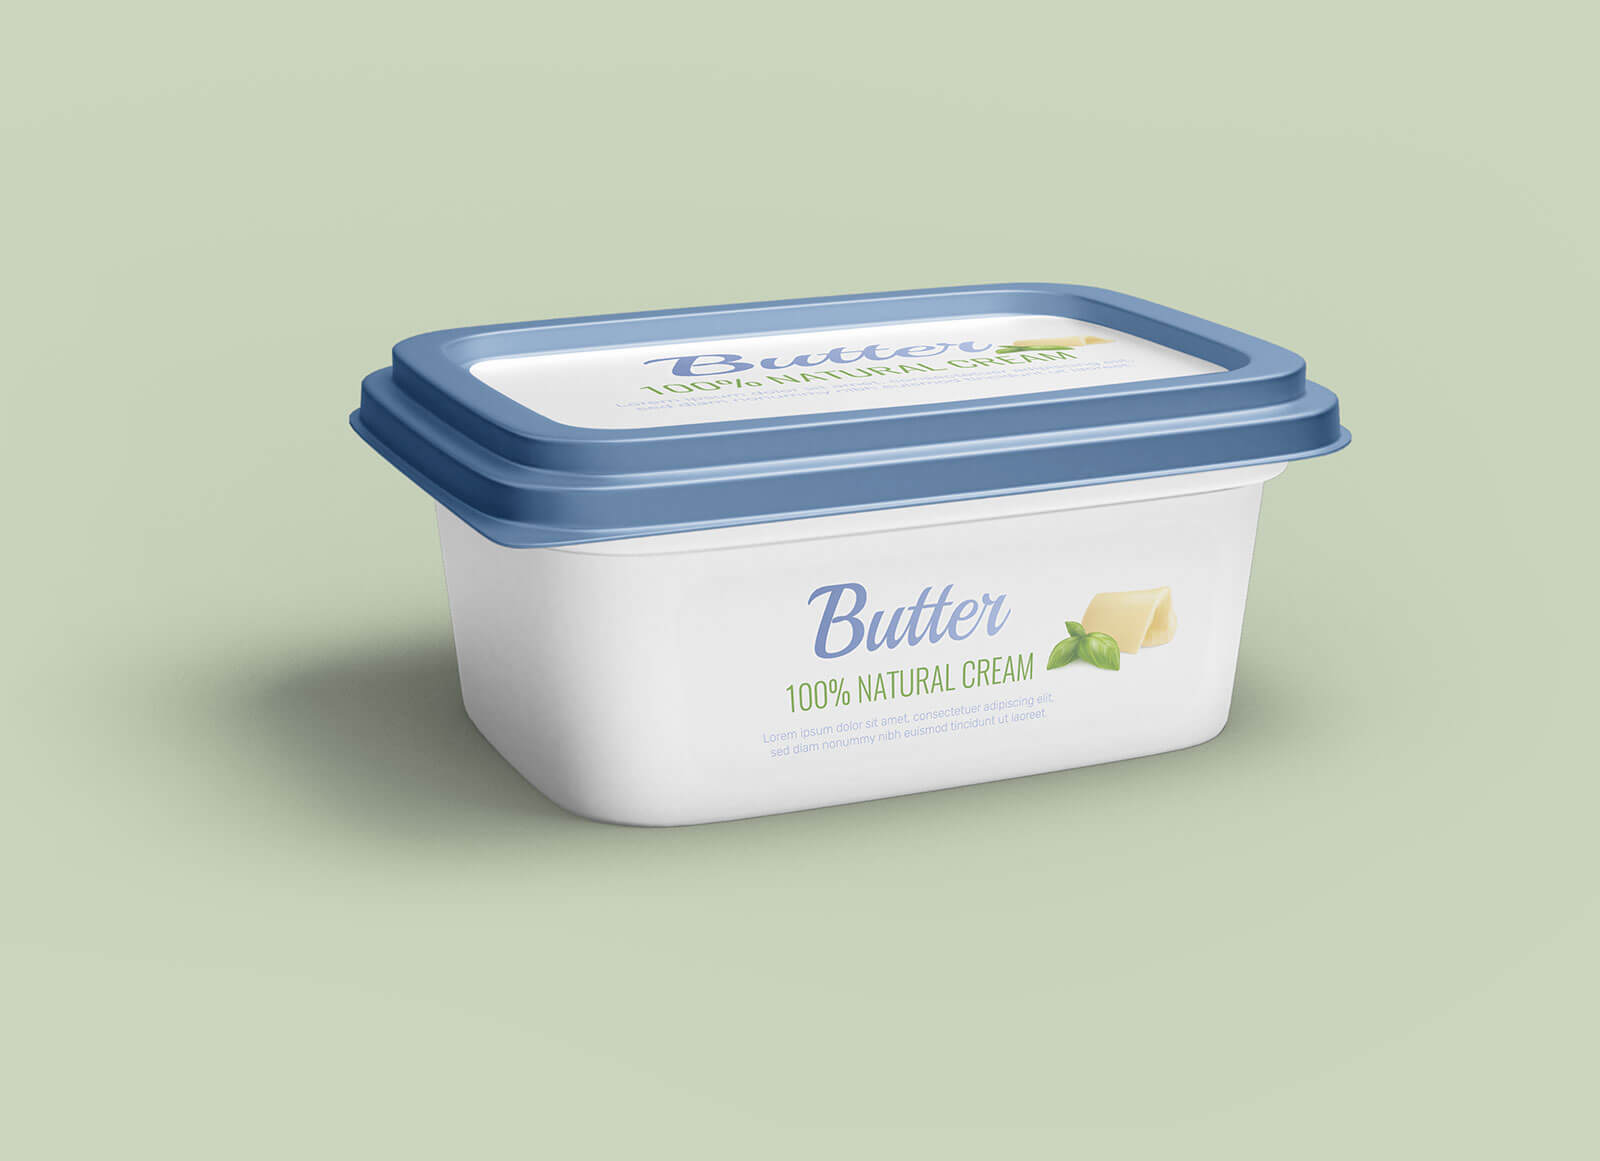 Butter Tub / Container Mockup